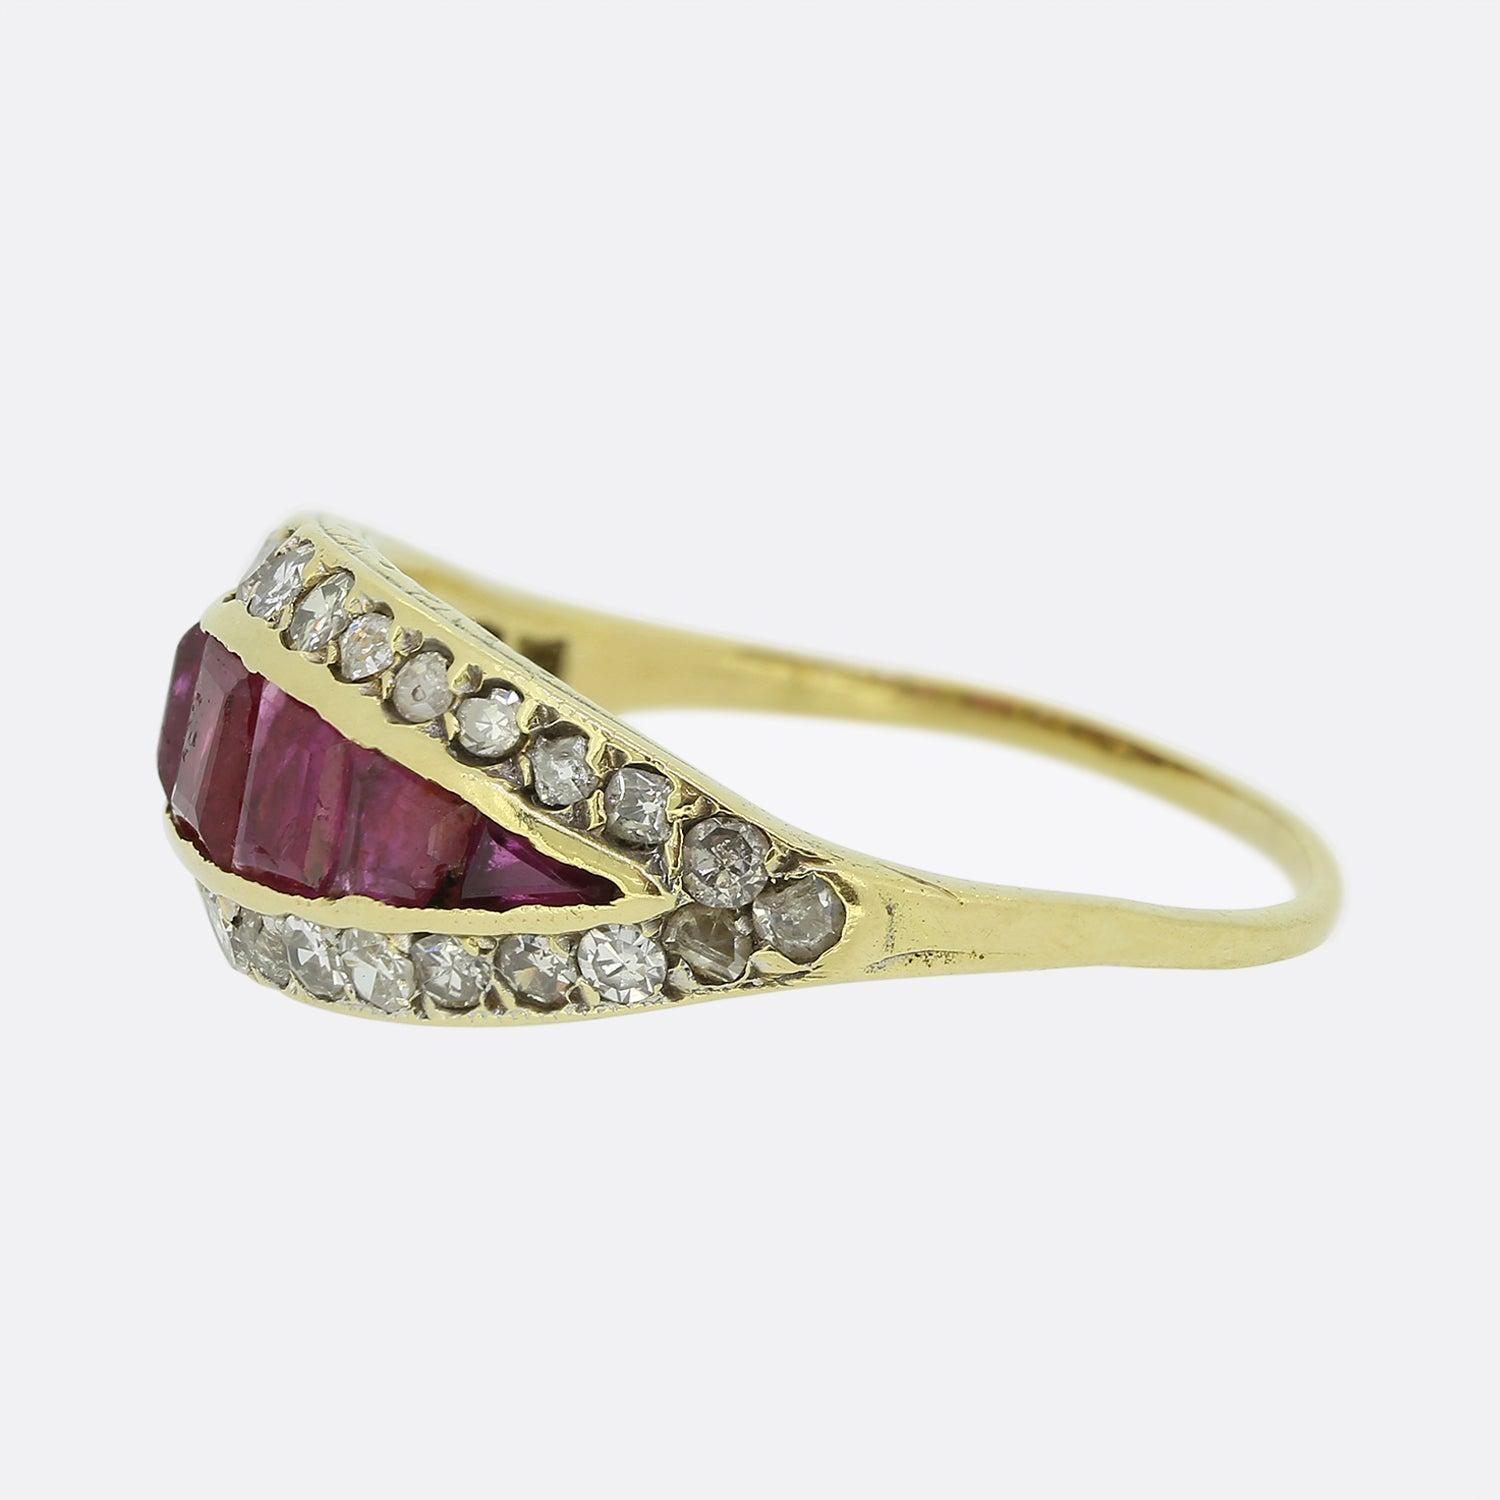 Here we have a delightful ruby and diamond ring from the Victorian era. This antique piece has been crafted from 15ct yellow gold and plays host to a graduating array of square calibrated rubies in a rub-over setting. These focal centralised stones